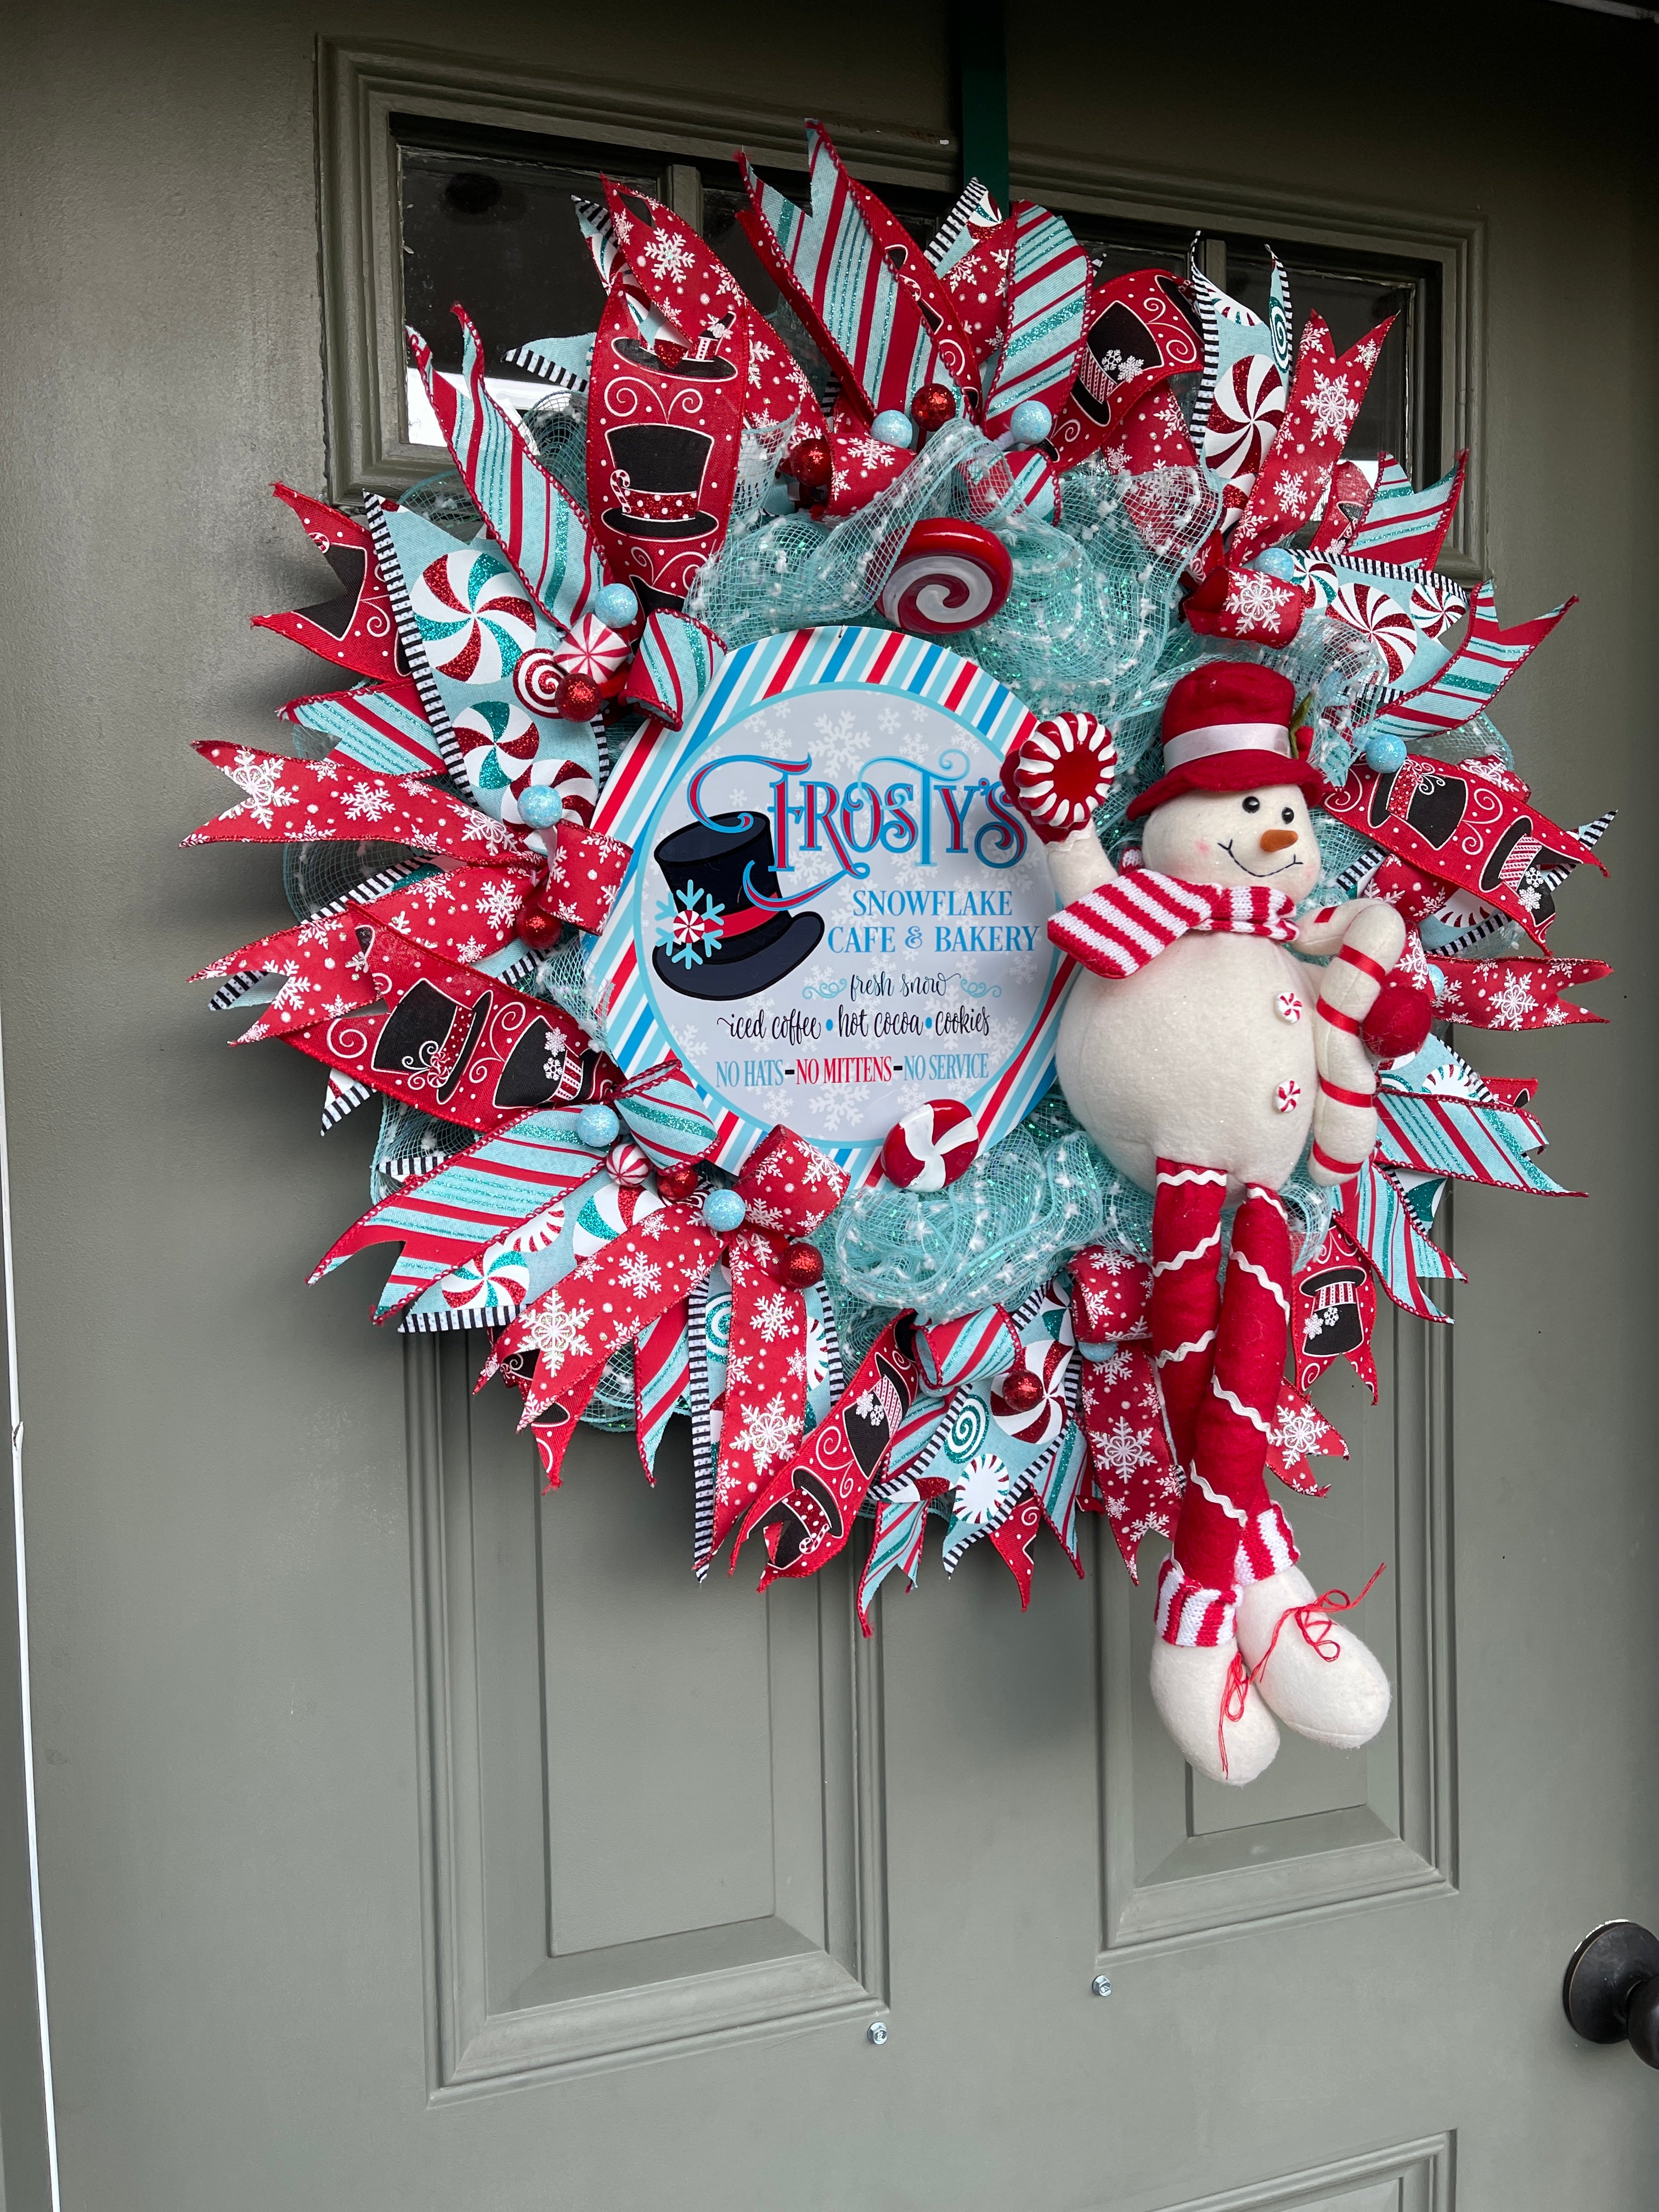 Left Side View of Red, White and Blue Winter Frosty the Snowman Deco Mesh Wreath with Peppermint Candy and Plush Snowman on a Green Door.